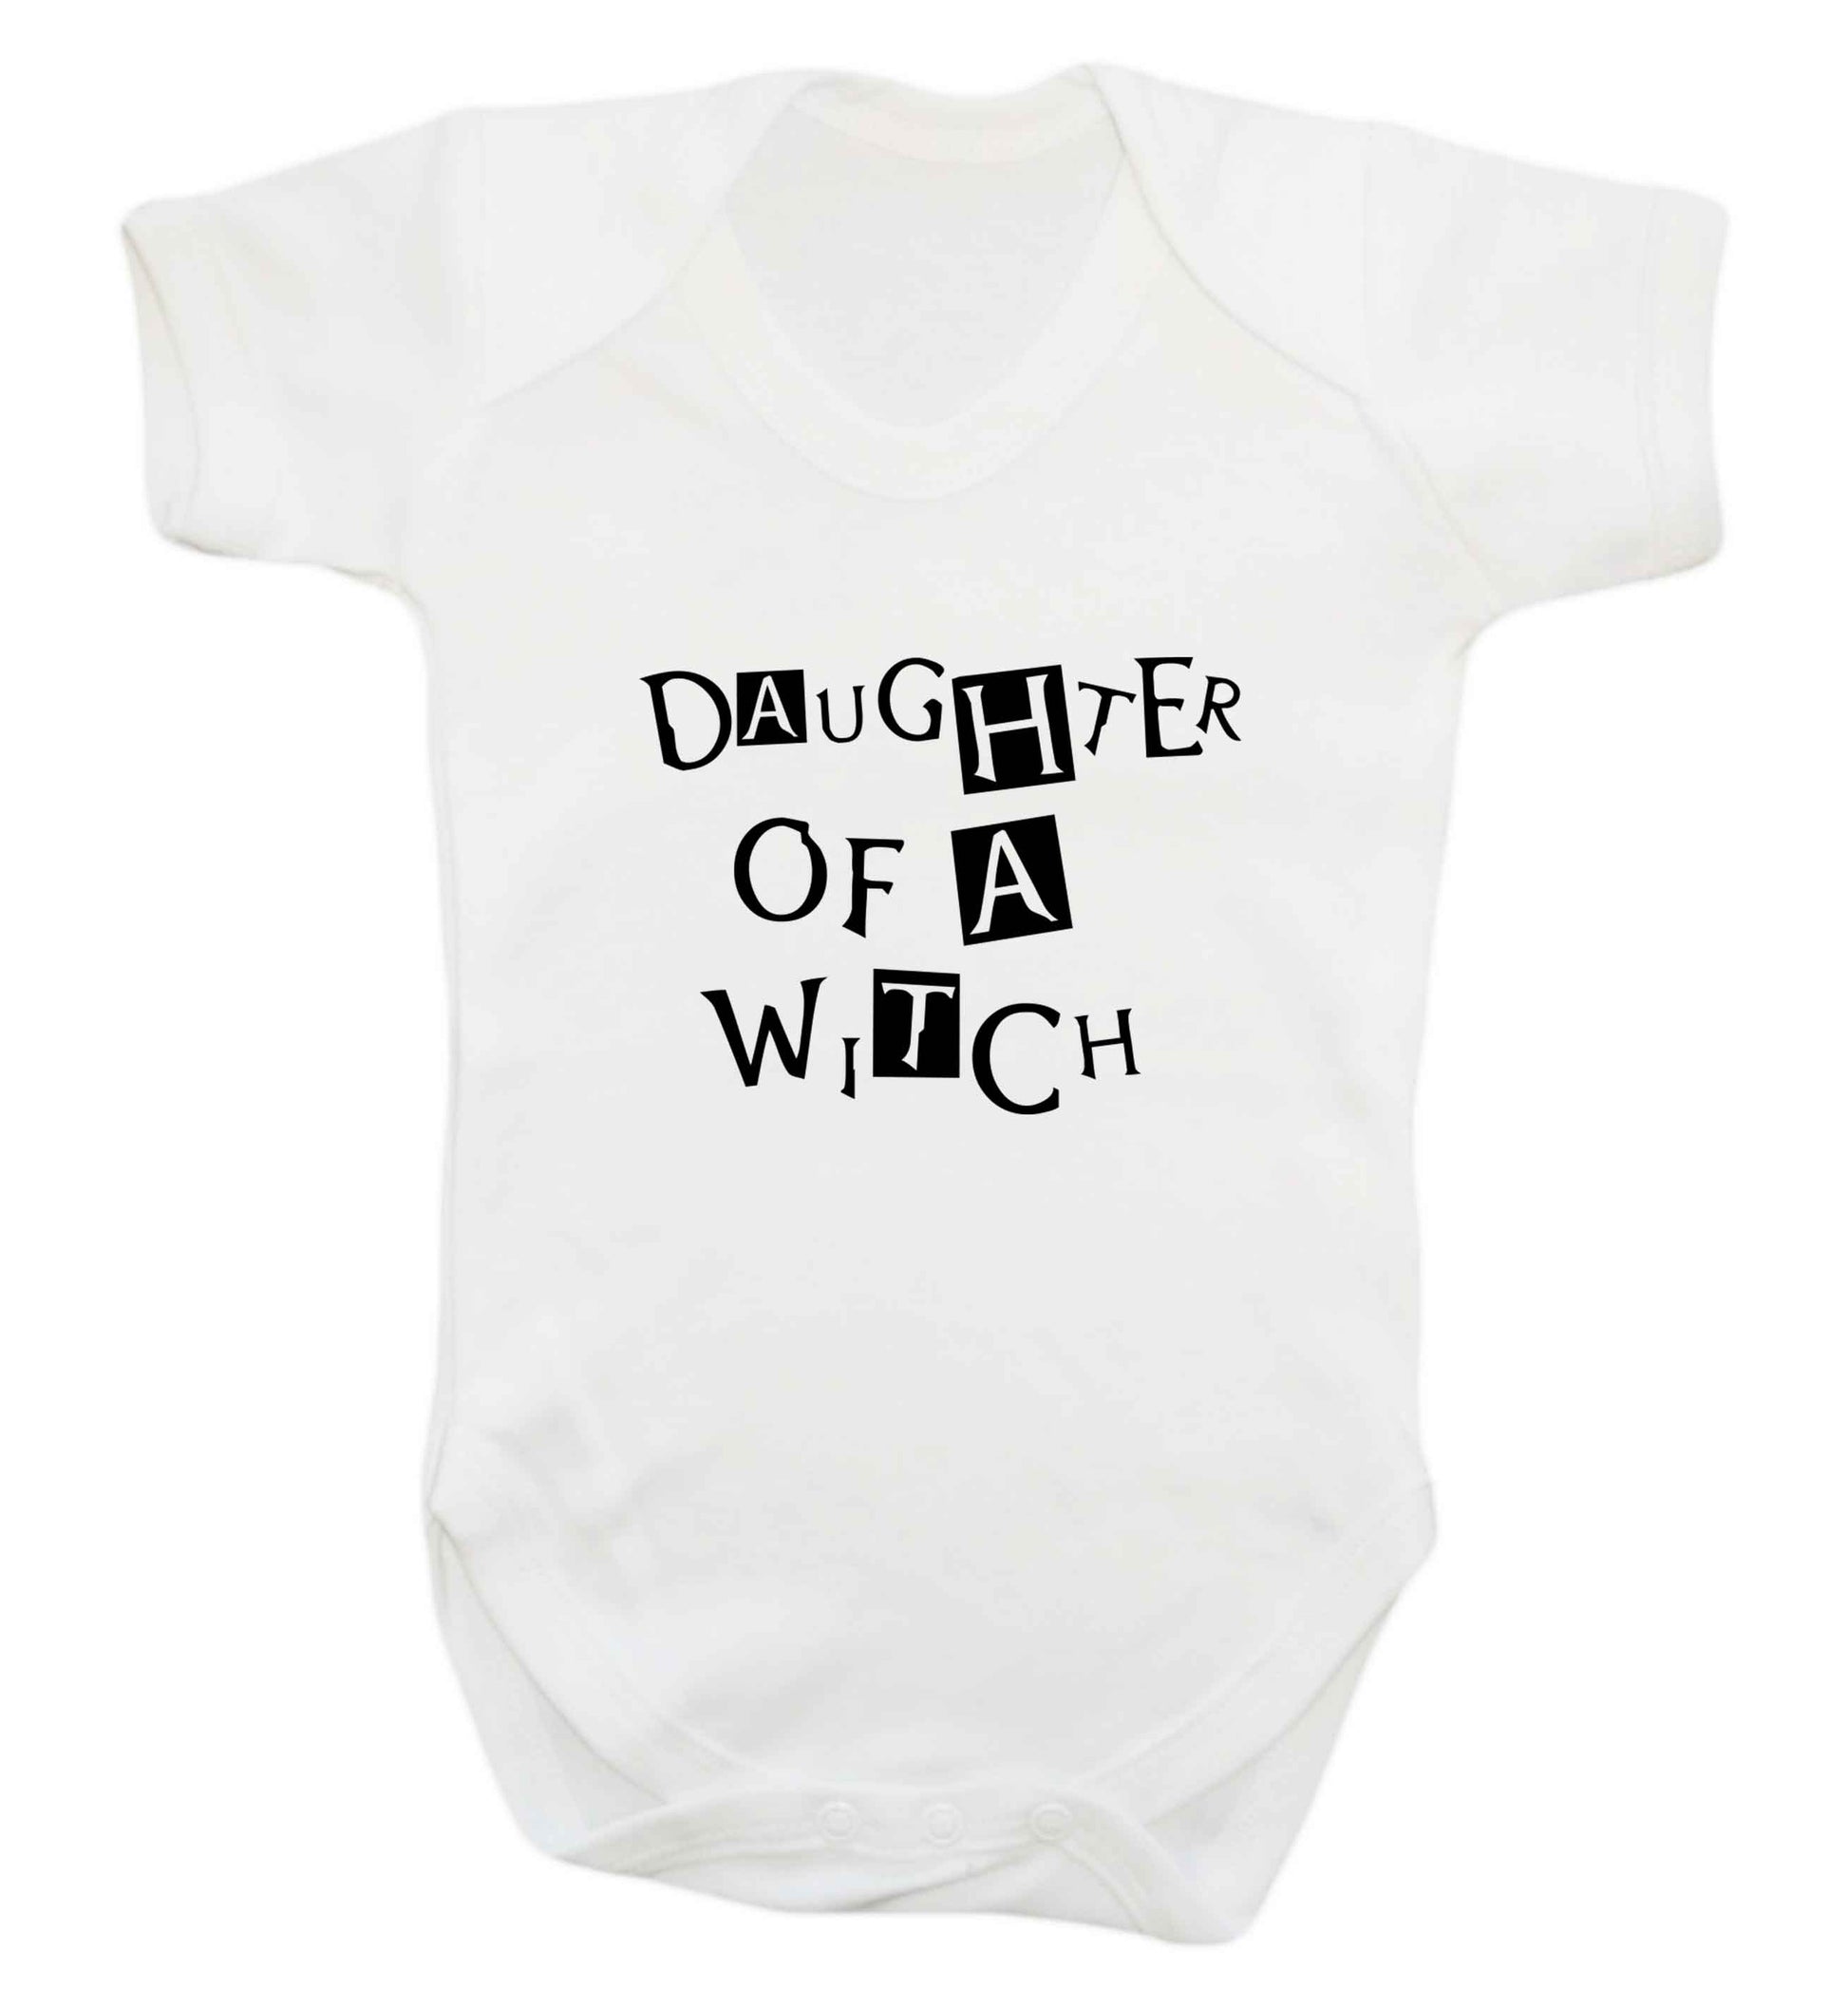 Daughter of a witch baby vest white 18-24 months